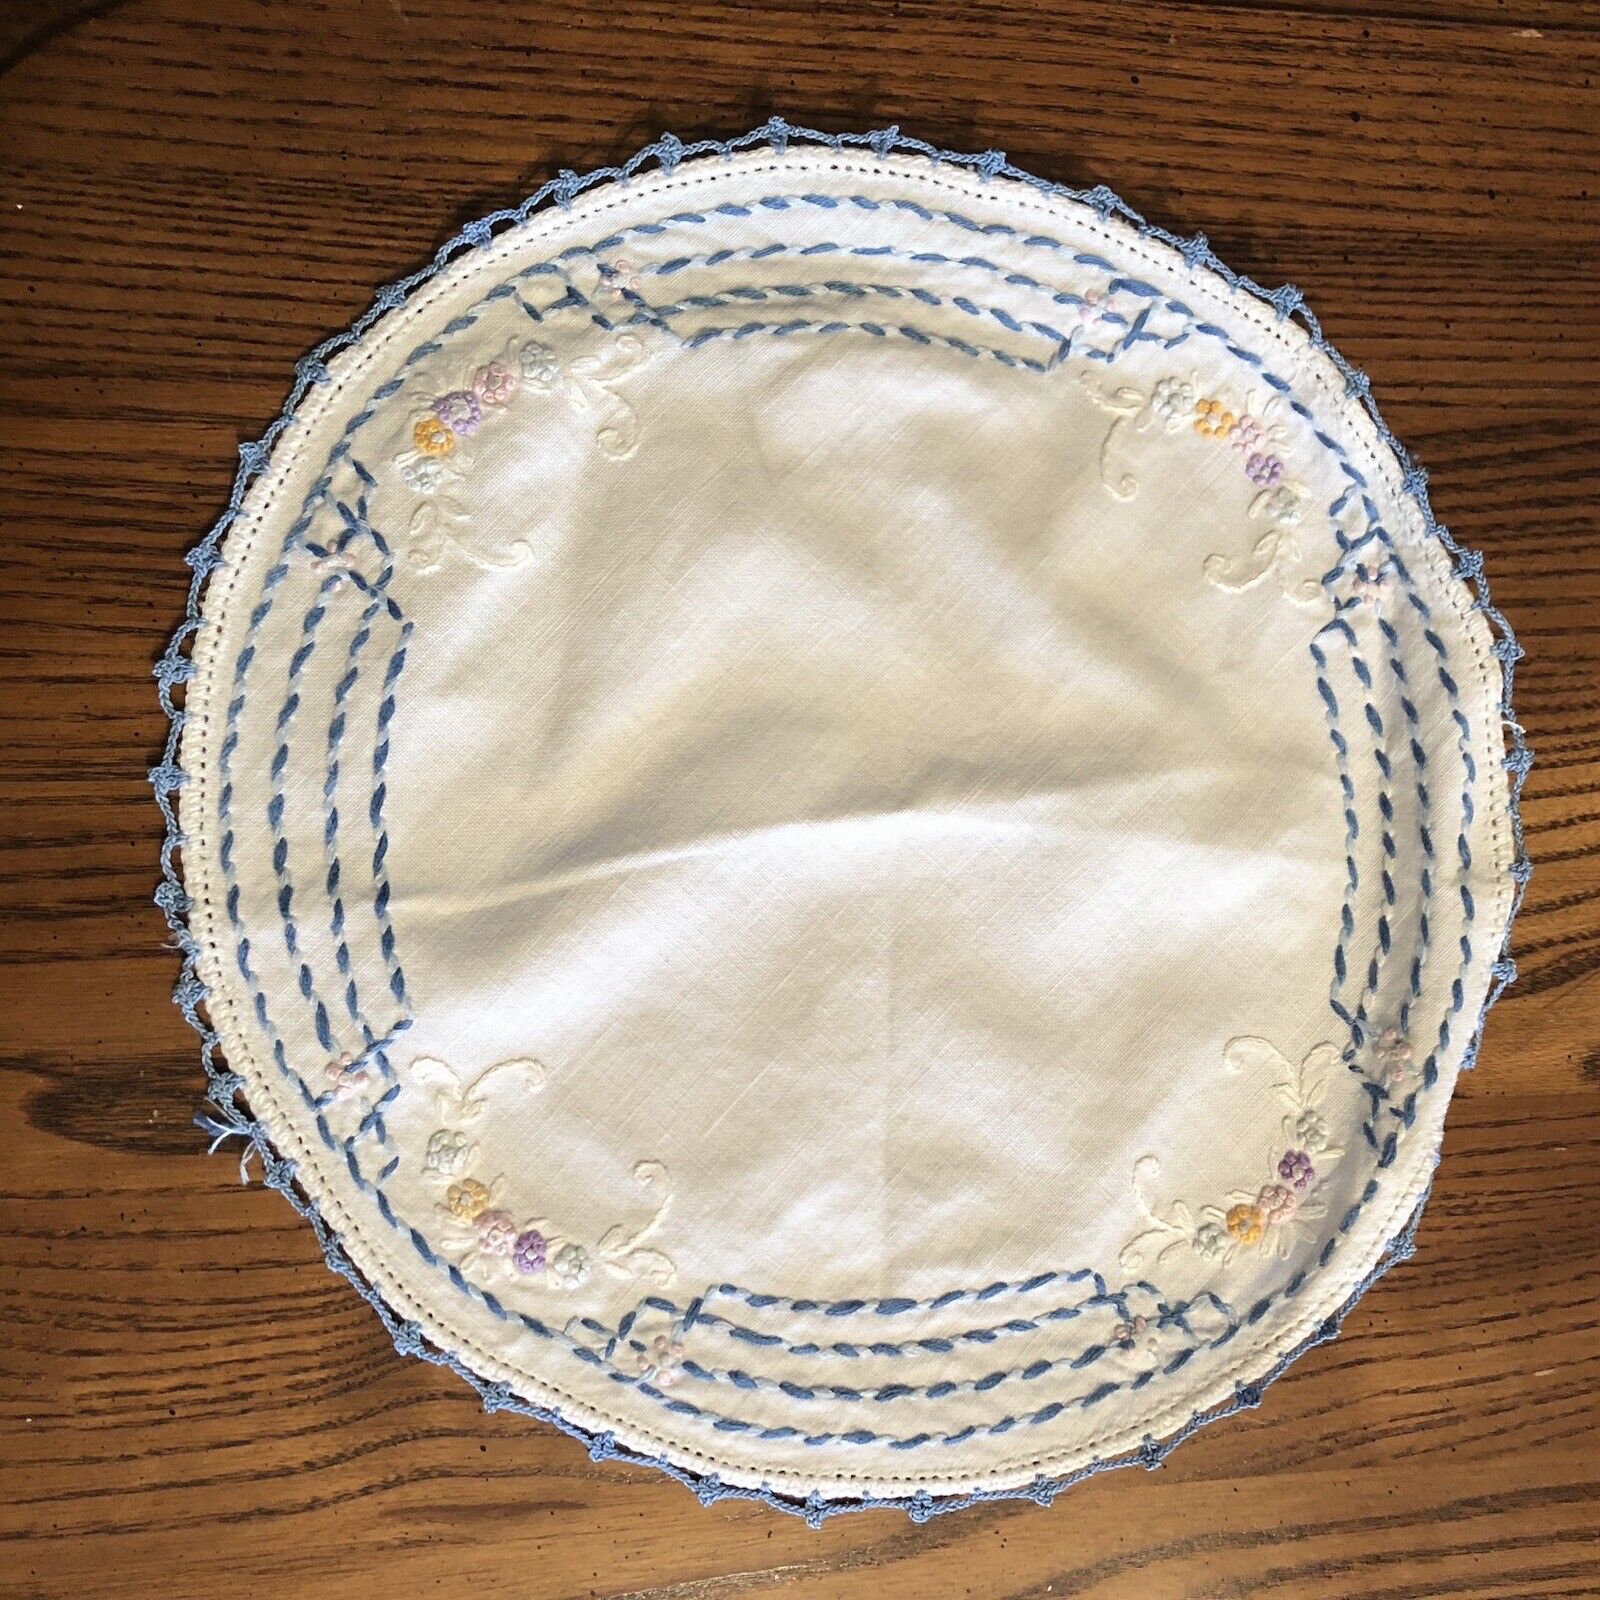 Embroidered Linens 4 Floral Napkins, Round Doily, & 4 Hankies Lot Of 9 Vintage